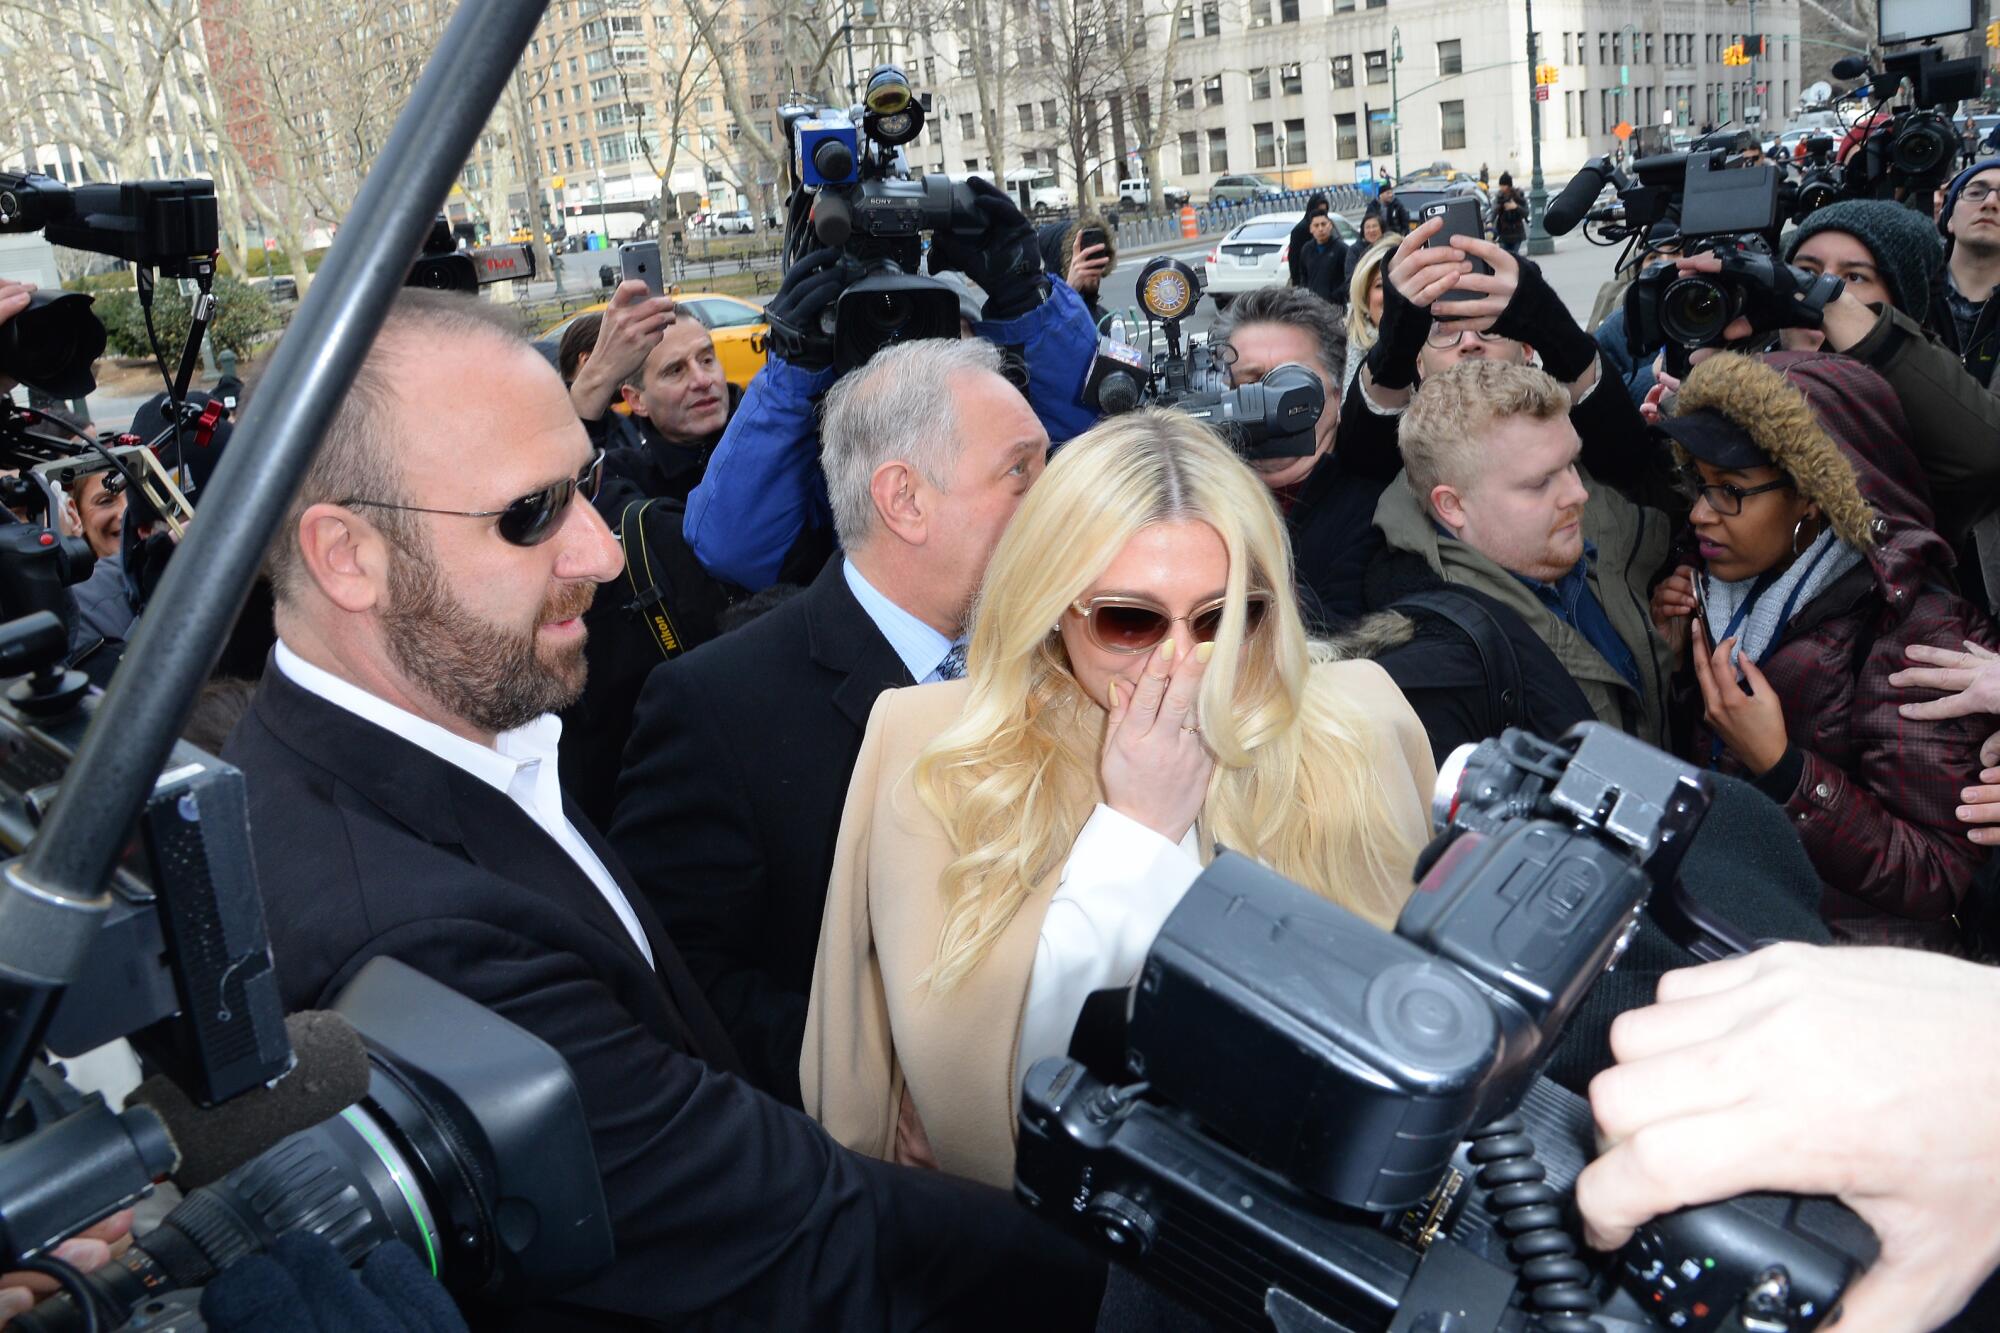 Singer Kesha surrounded by news media outside a courtroom